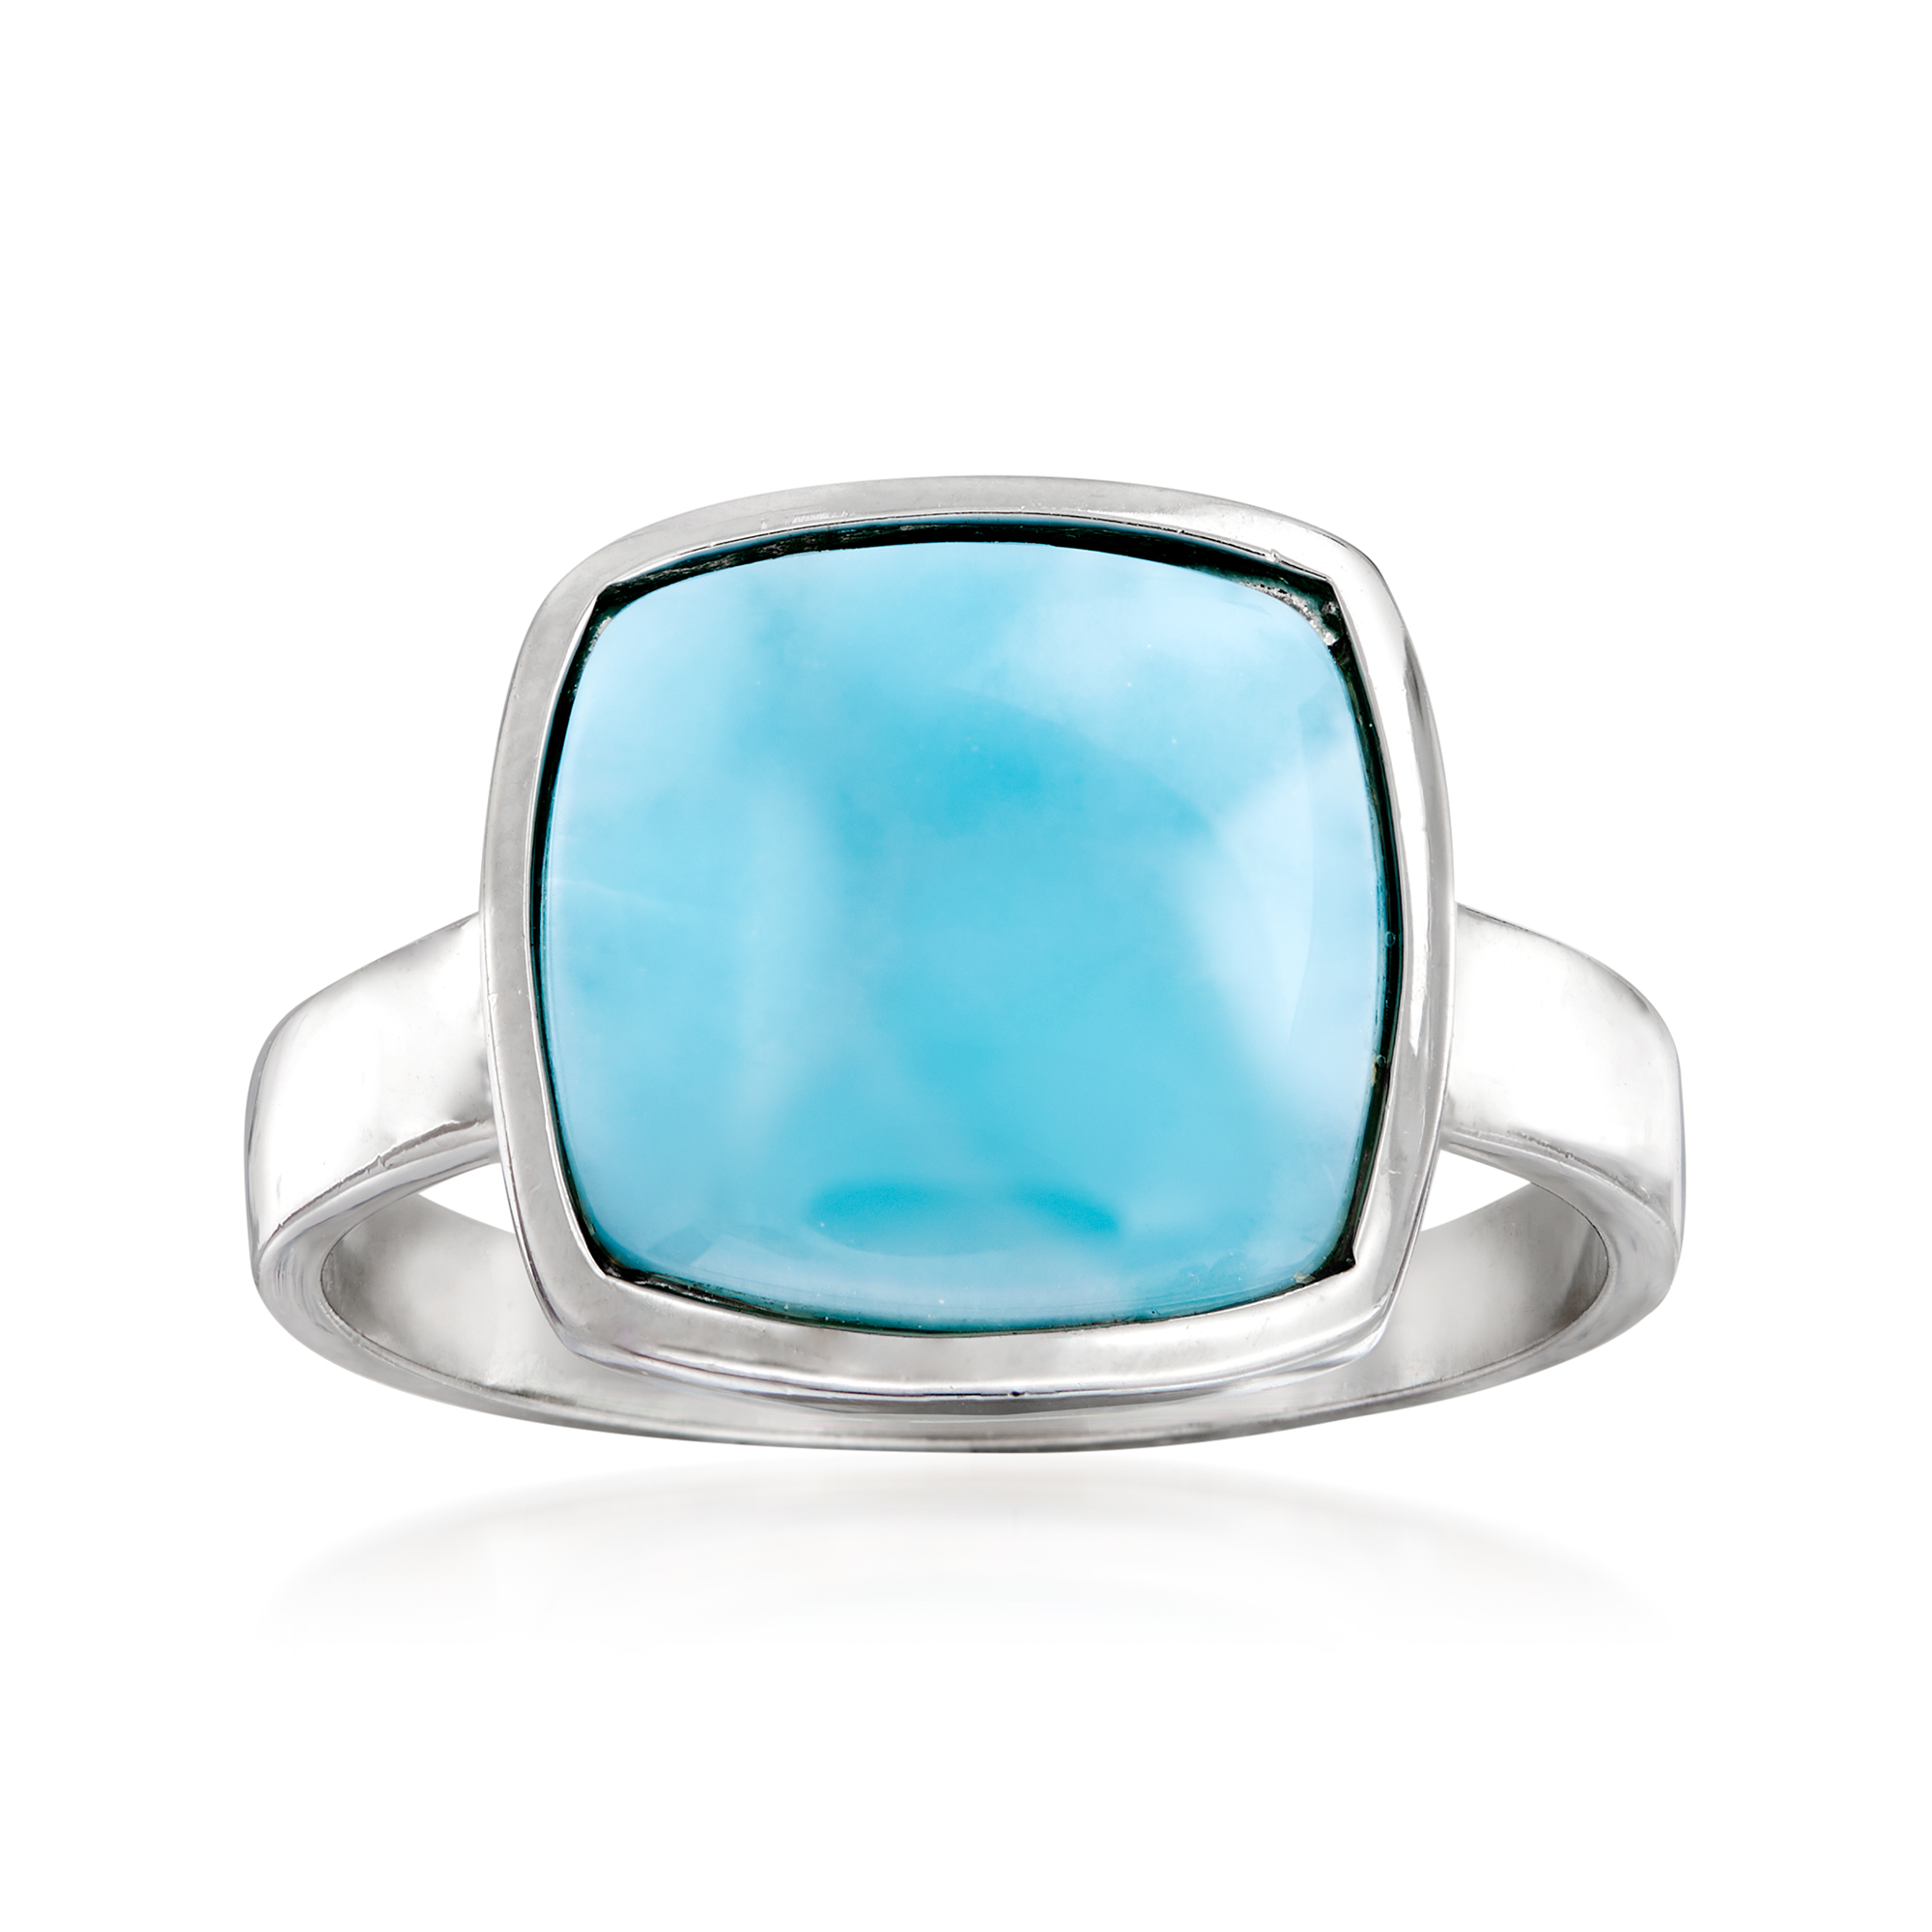 WHOLESALE 5PC 925 SOLID STERLING SILVER BLUE LARIMAR RING LOT N575 